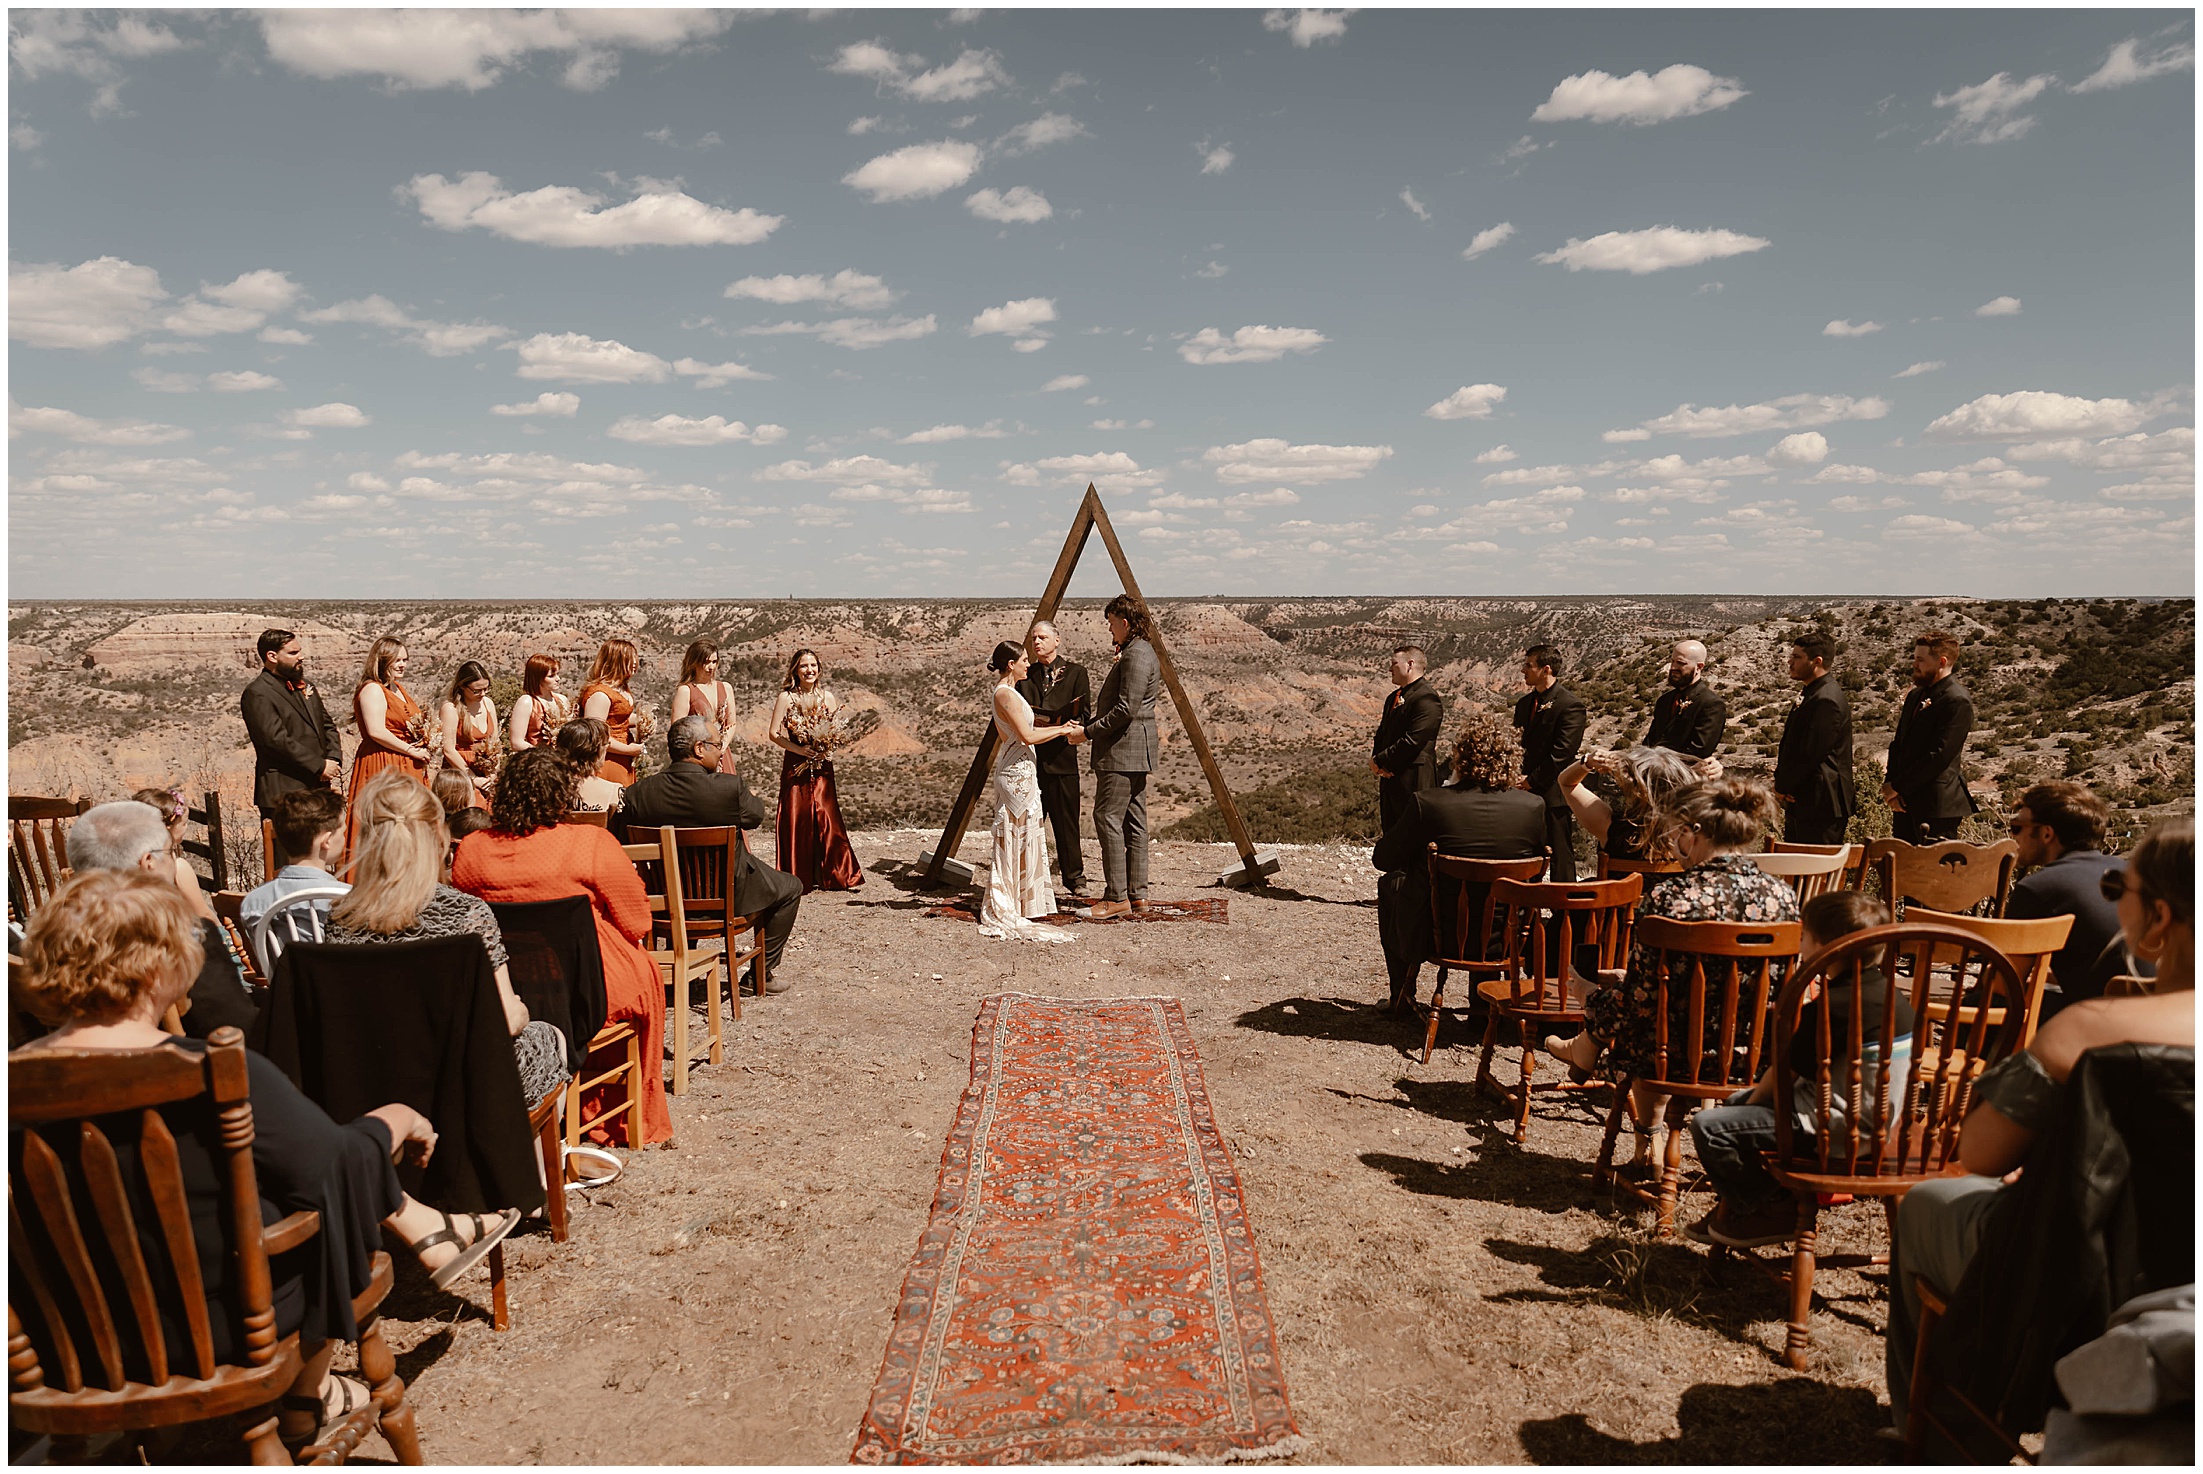 Palo Duro Canyon weddings, Palo Duro Canyon elopements, Texas wedding packages, Texas elopement packages, Unique Palo Duro Canyon venues, Scenic wedding locations in Palo Duro Canyon Memorable elopements in Palo Duro Canyon, Texas destination weddings, Intimate ceremonies in Palo Duro, Canyon, Expert wedding planning in Palo Duro Canyon, Brit Nicole Photography, Best wedding photographer 